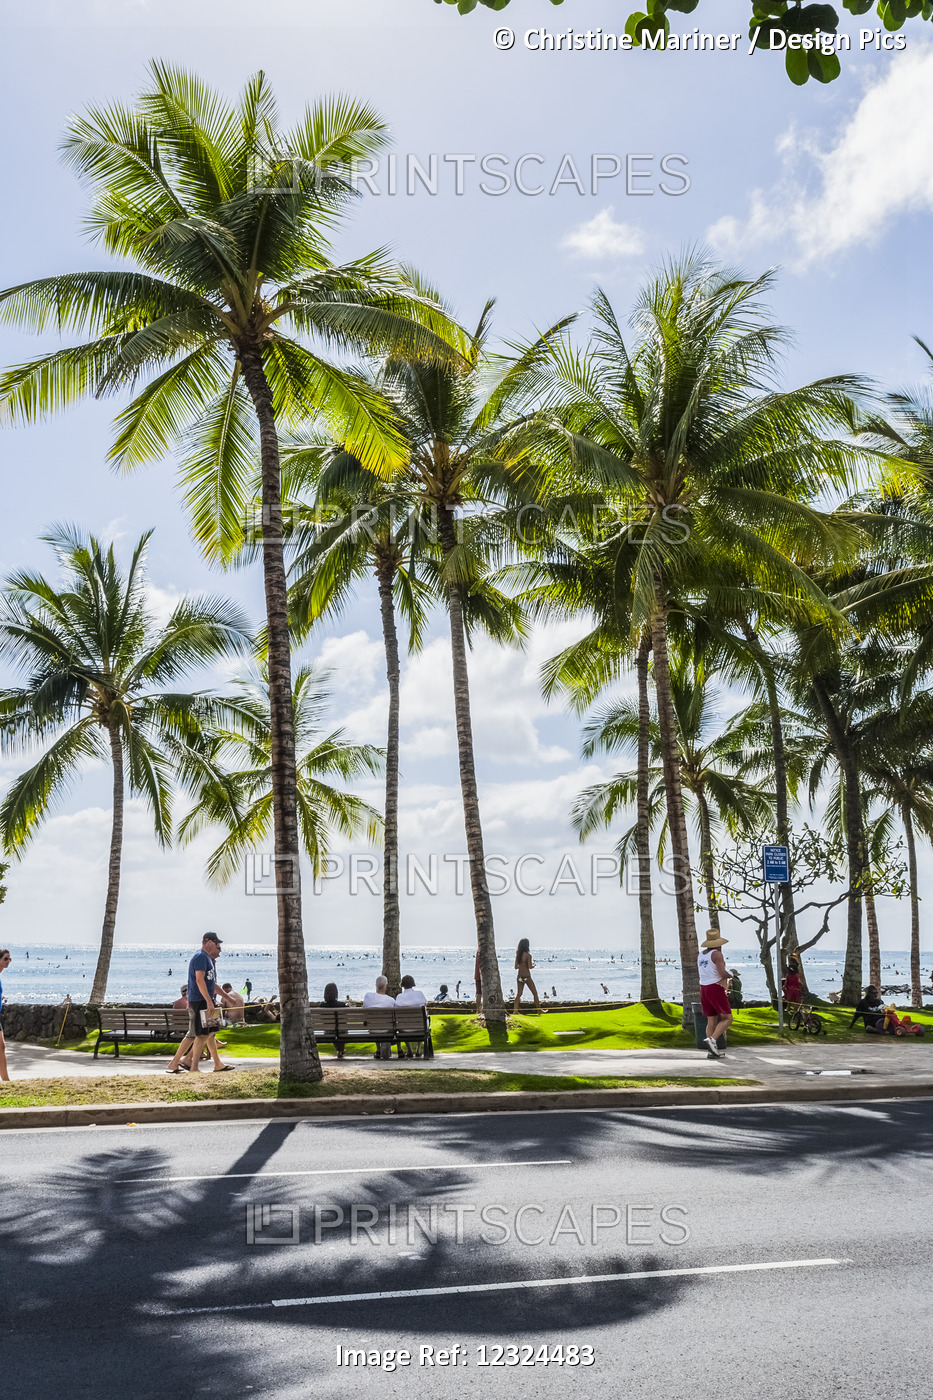 Tourists Walking Along The Street With Palm Trees And A View Of The Ocean In ...